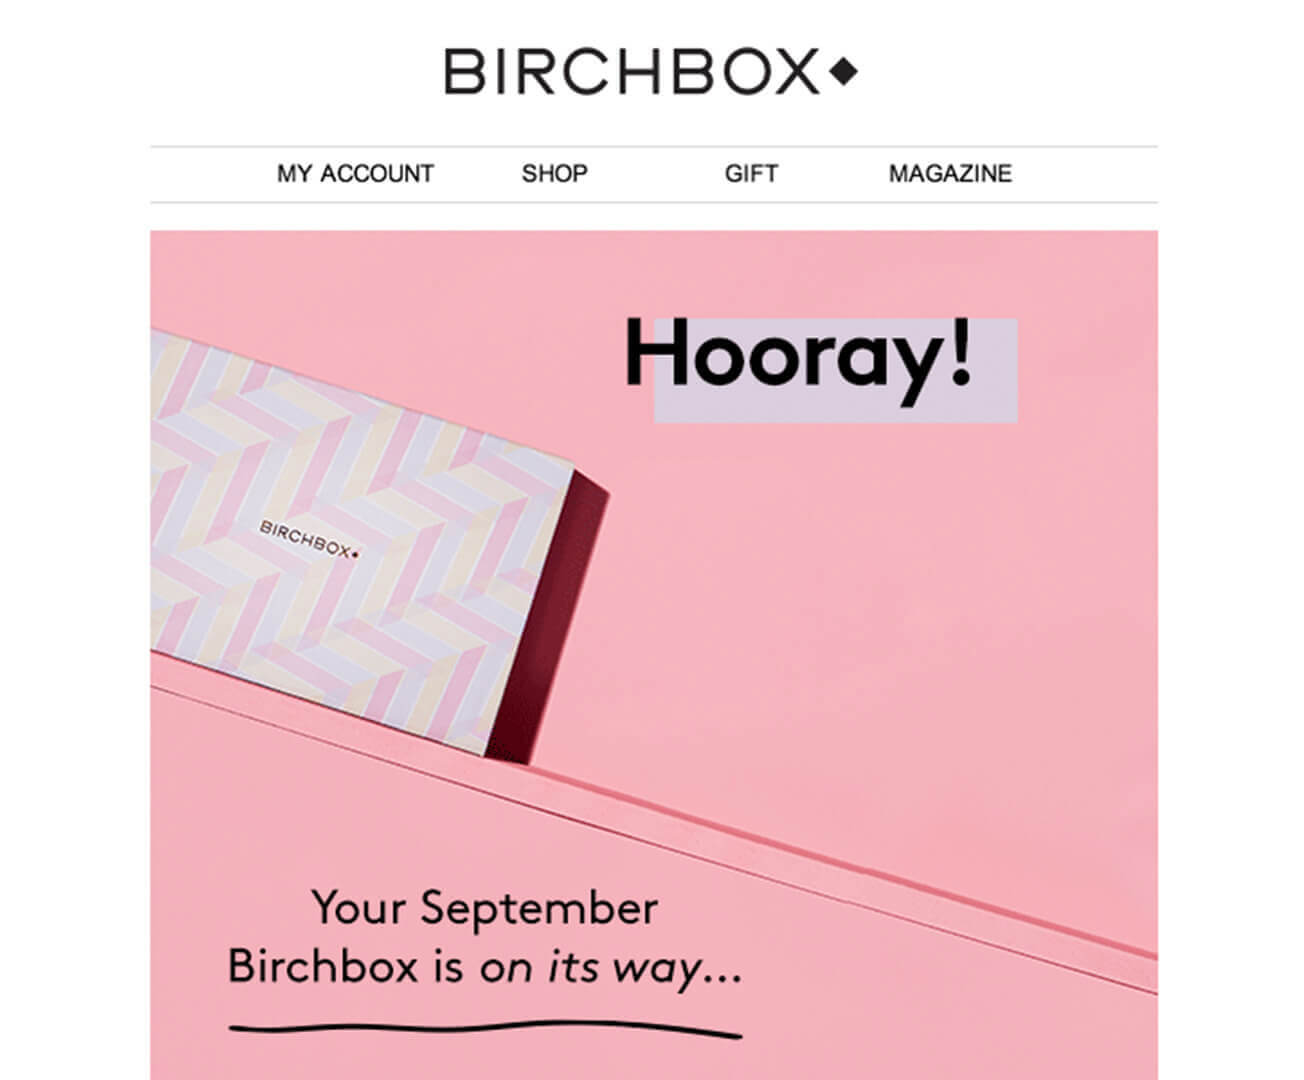 Birchbox - Email Marketing Campaign Example